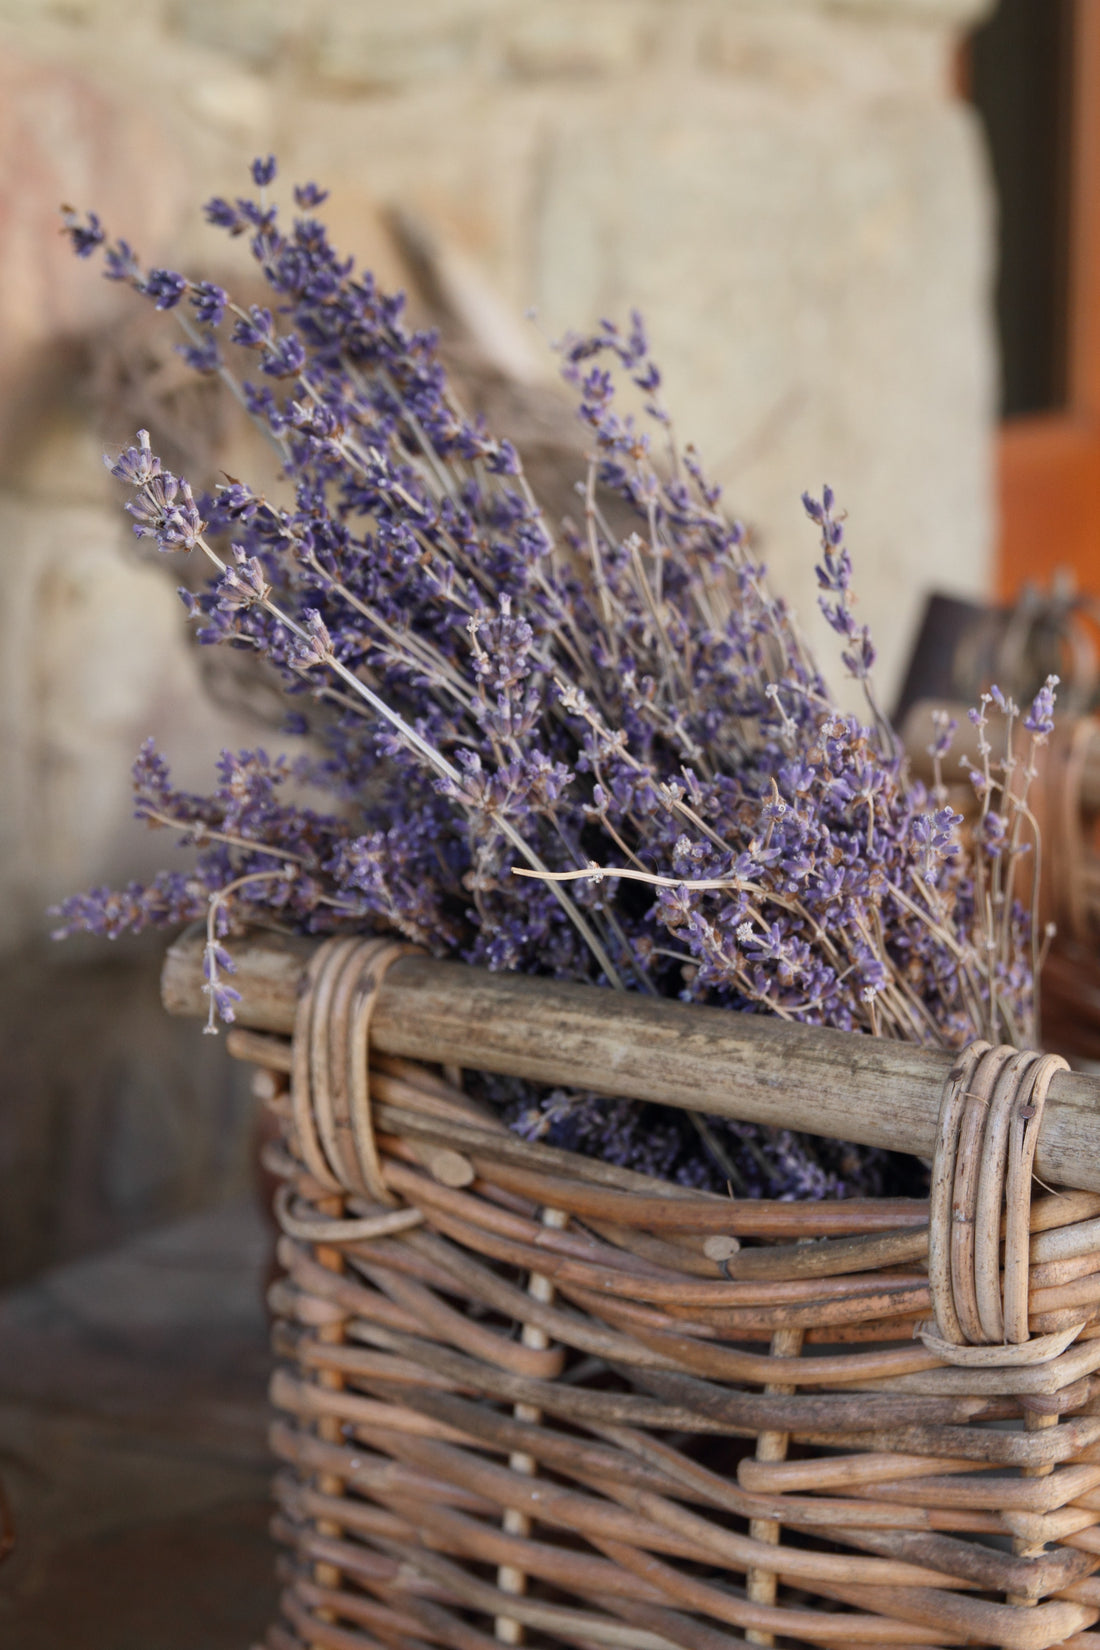 Tips to Prolong the Beauty of Your Lavender Bouquet